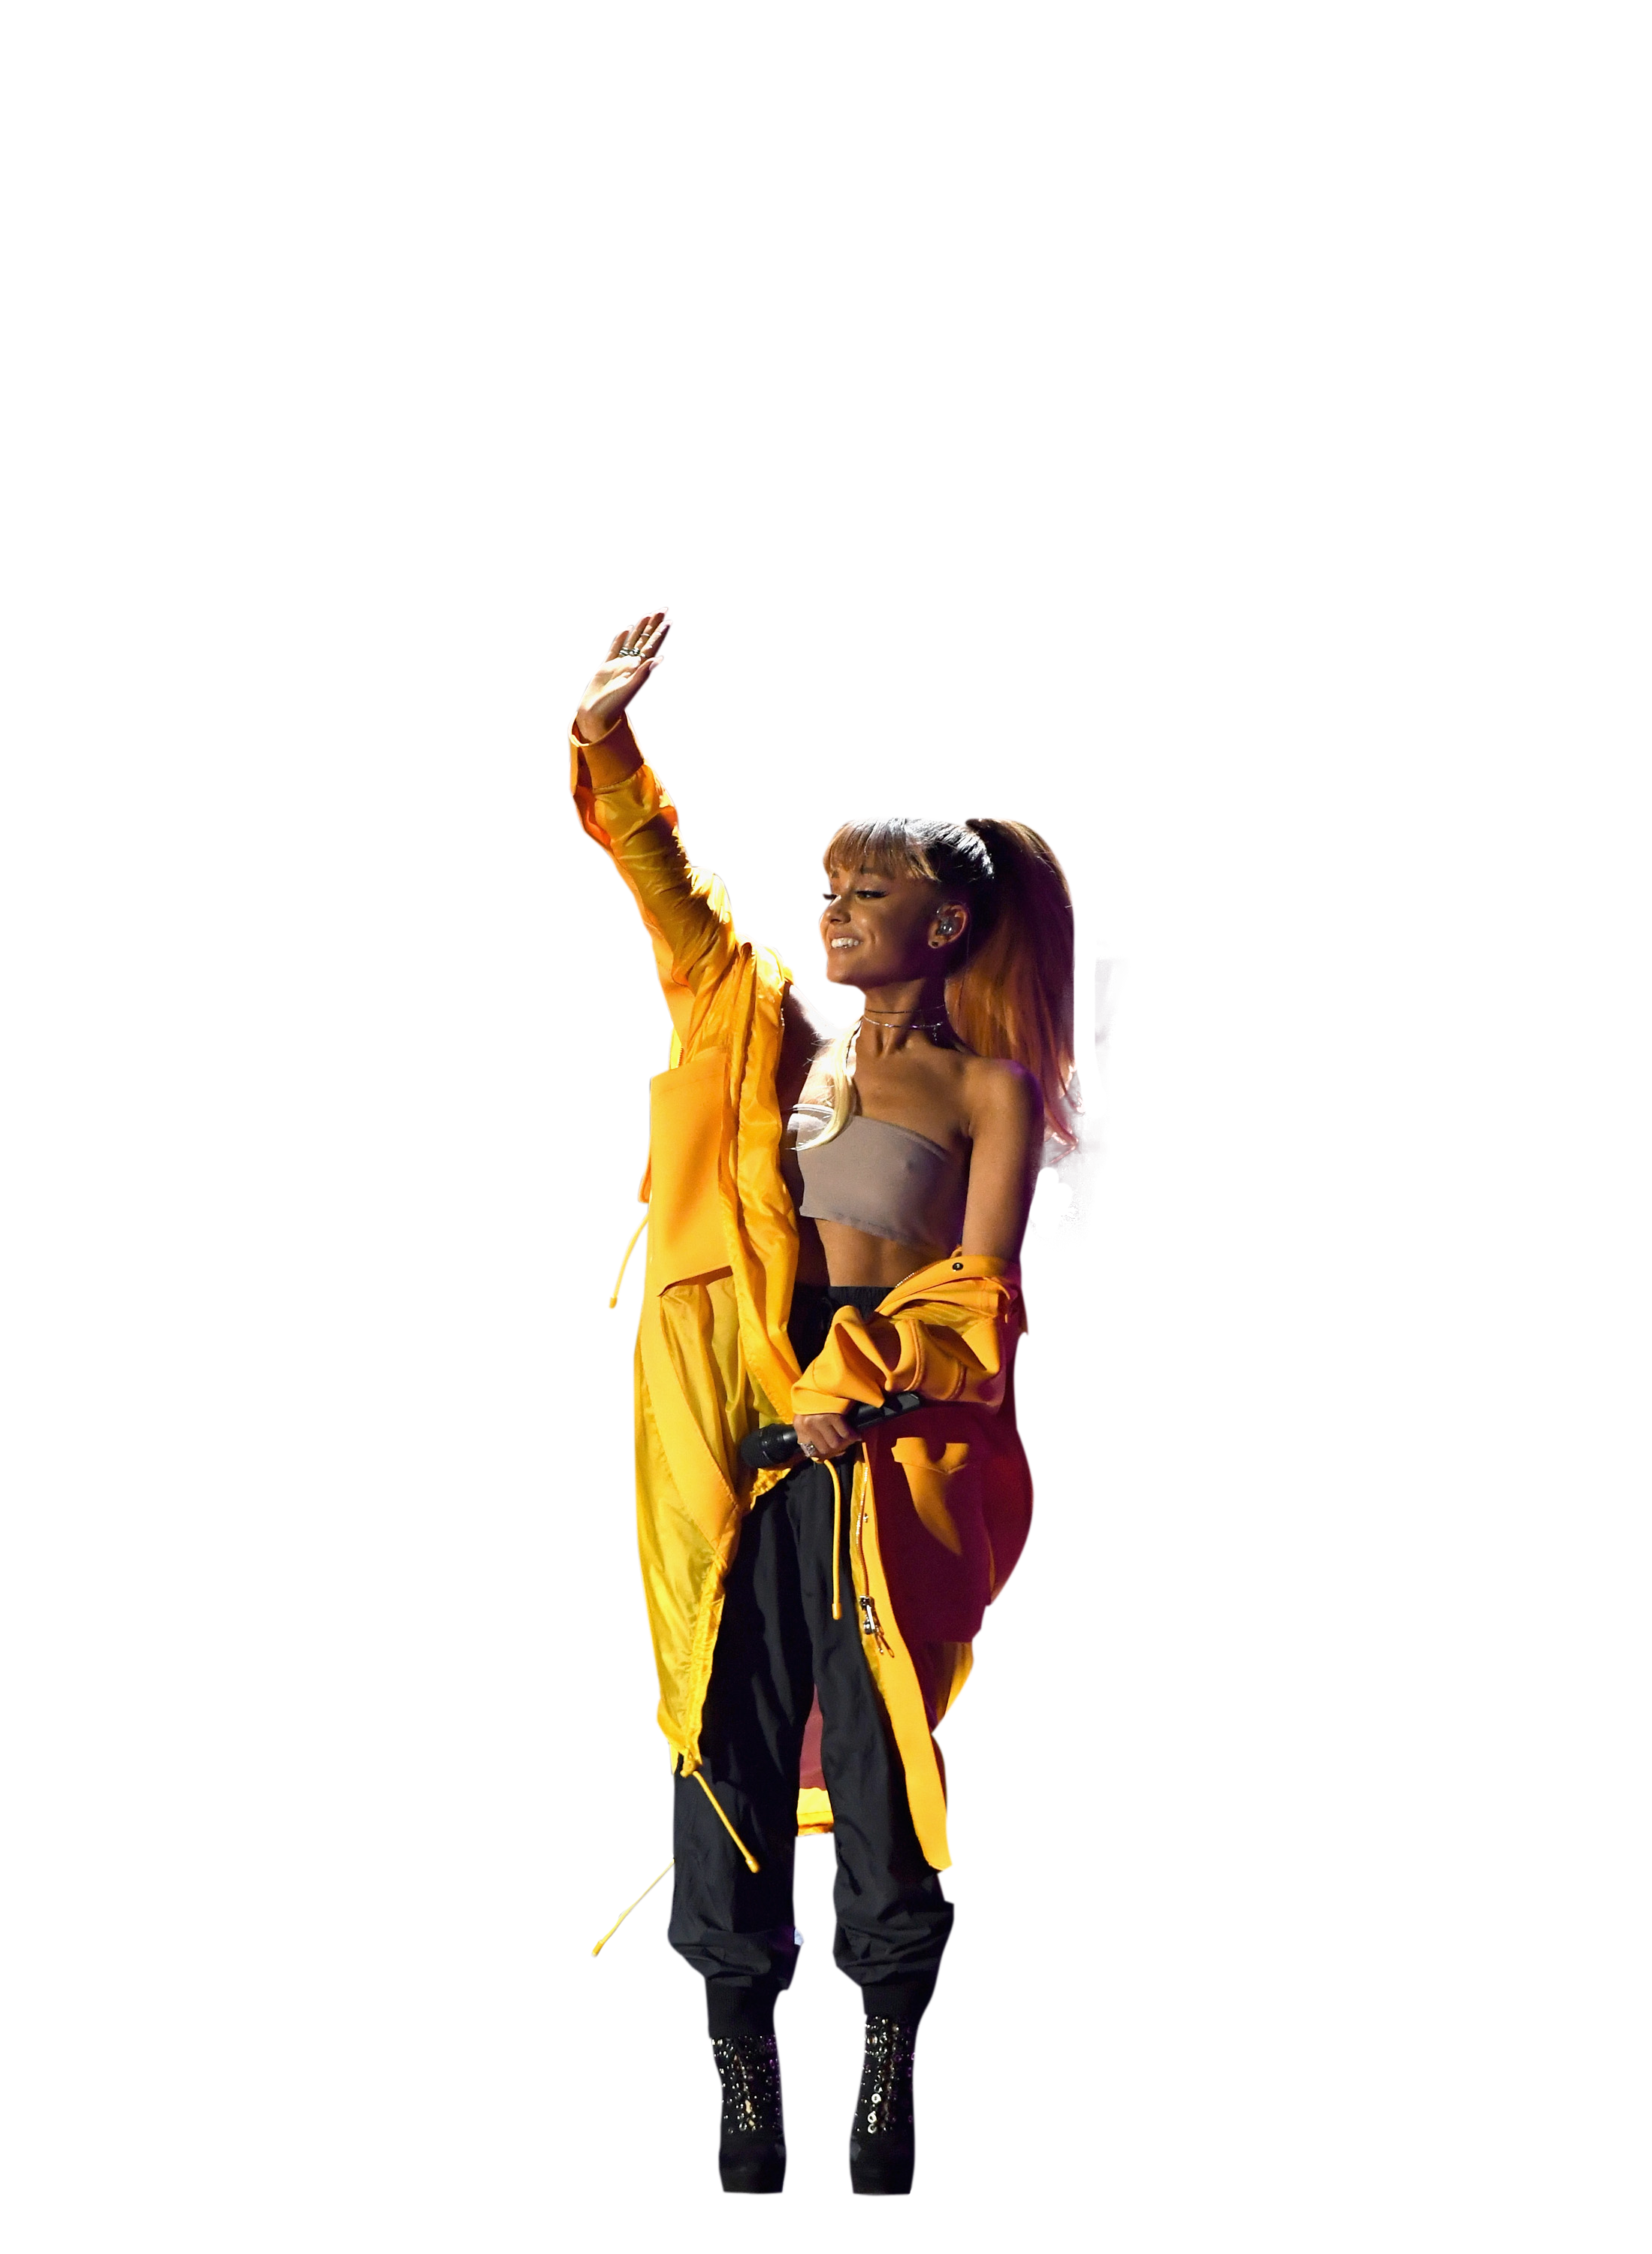 Ariana Grande in yellow dress on stage PNG Image - PurePNG 